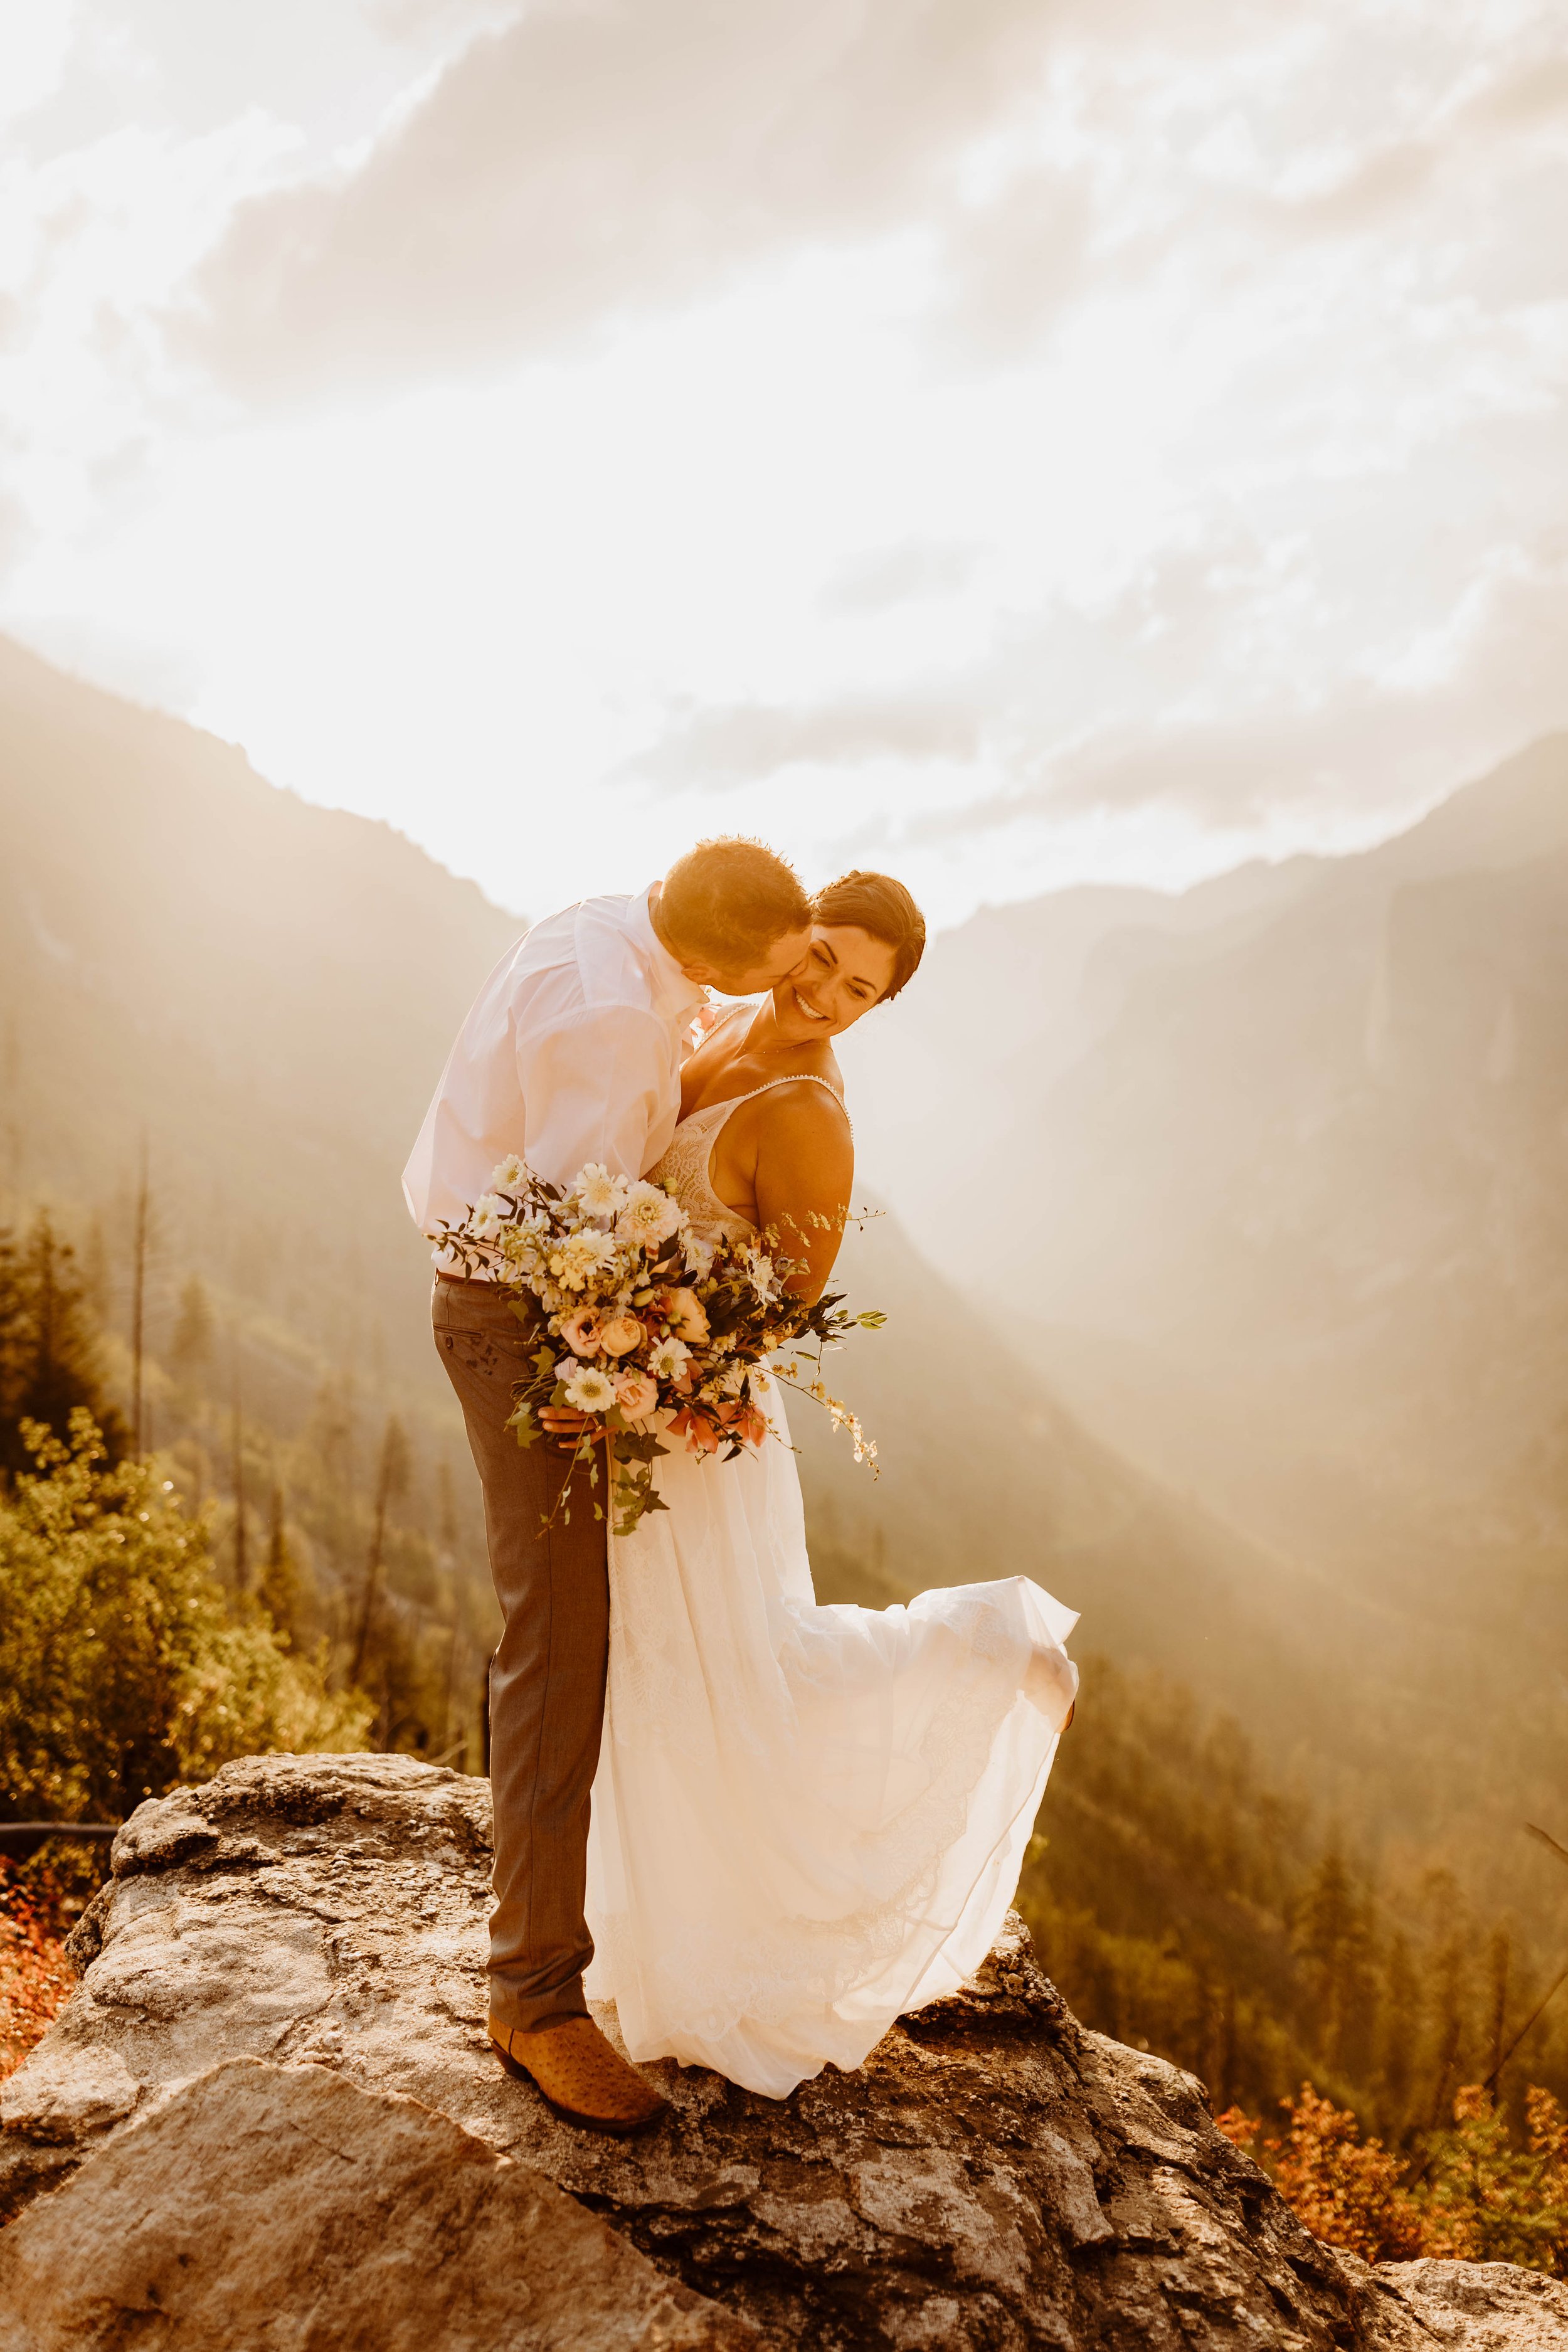 Where to Elope in Montana